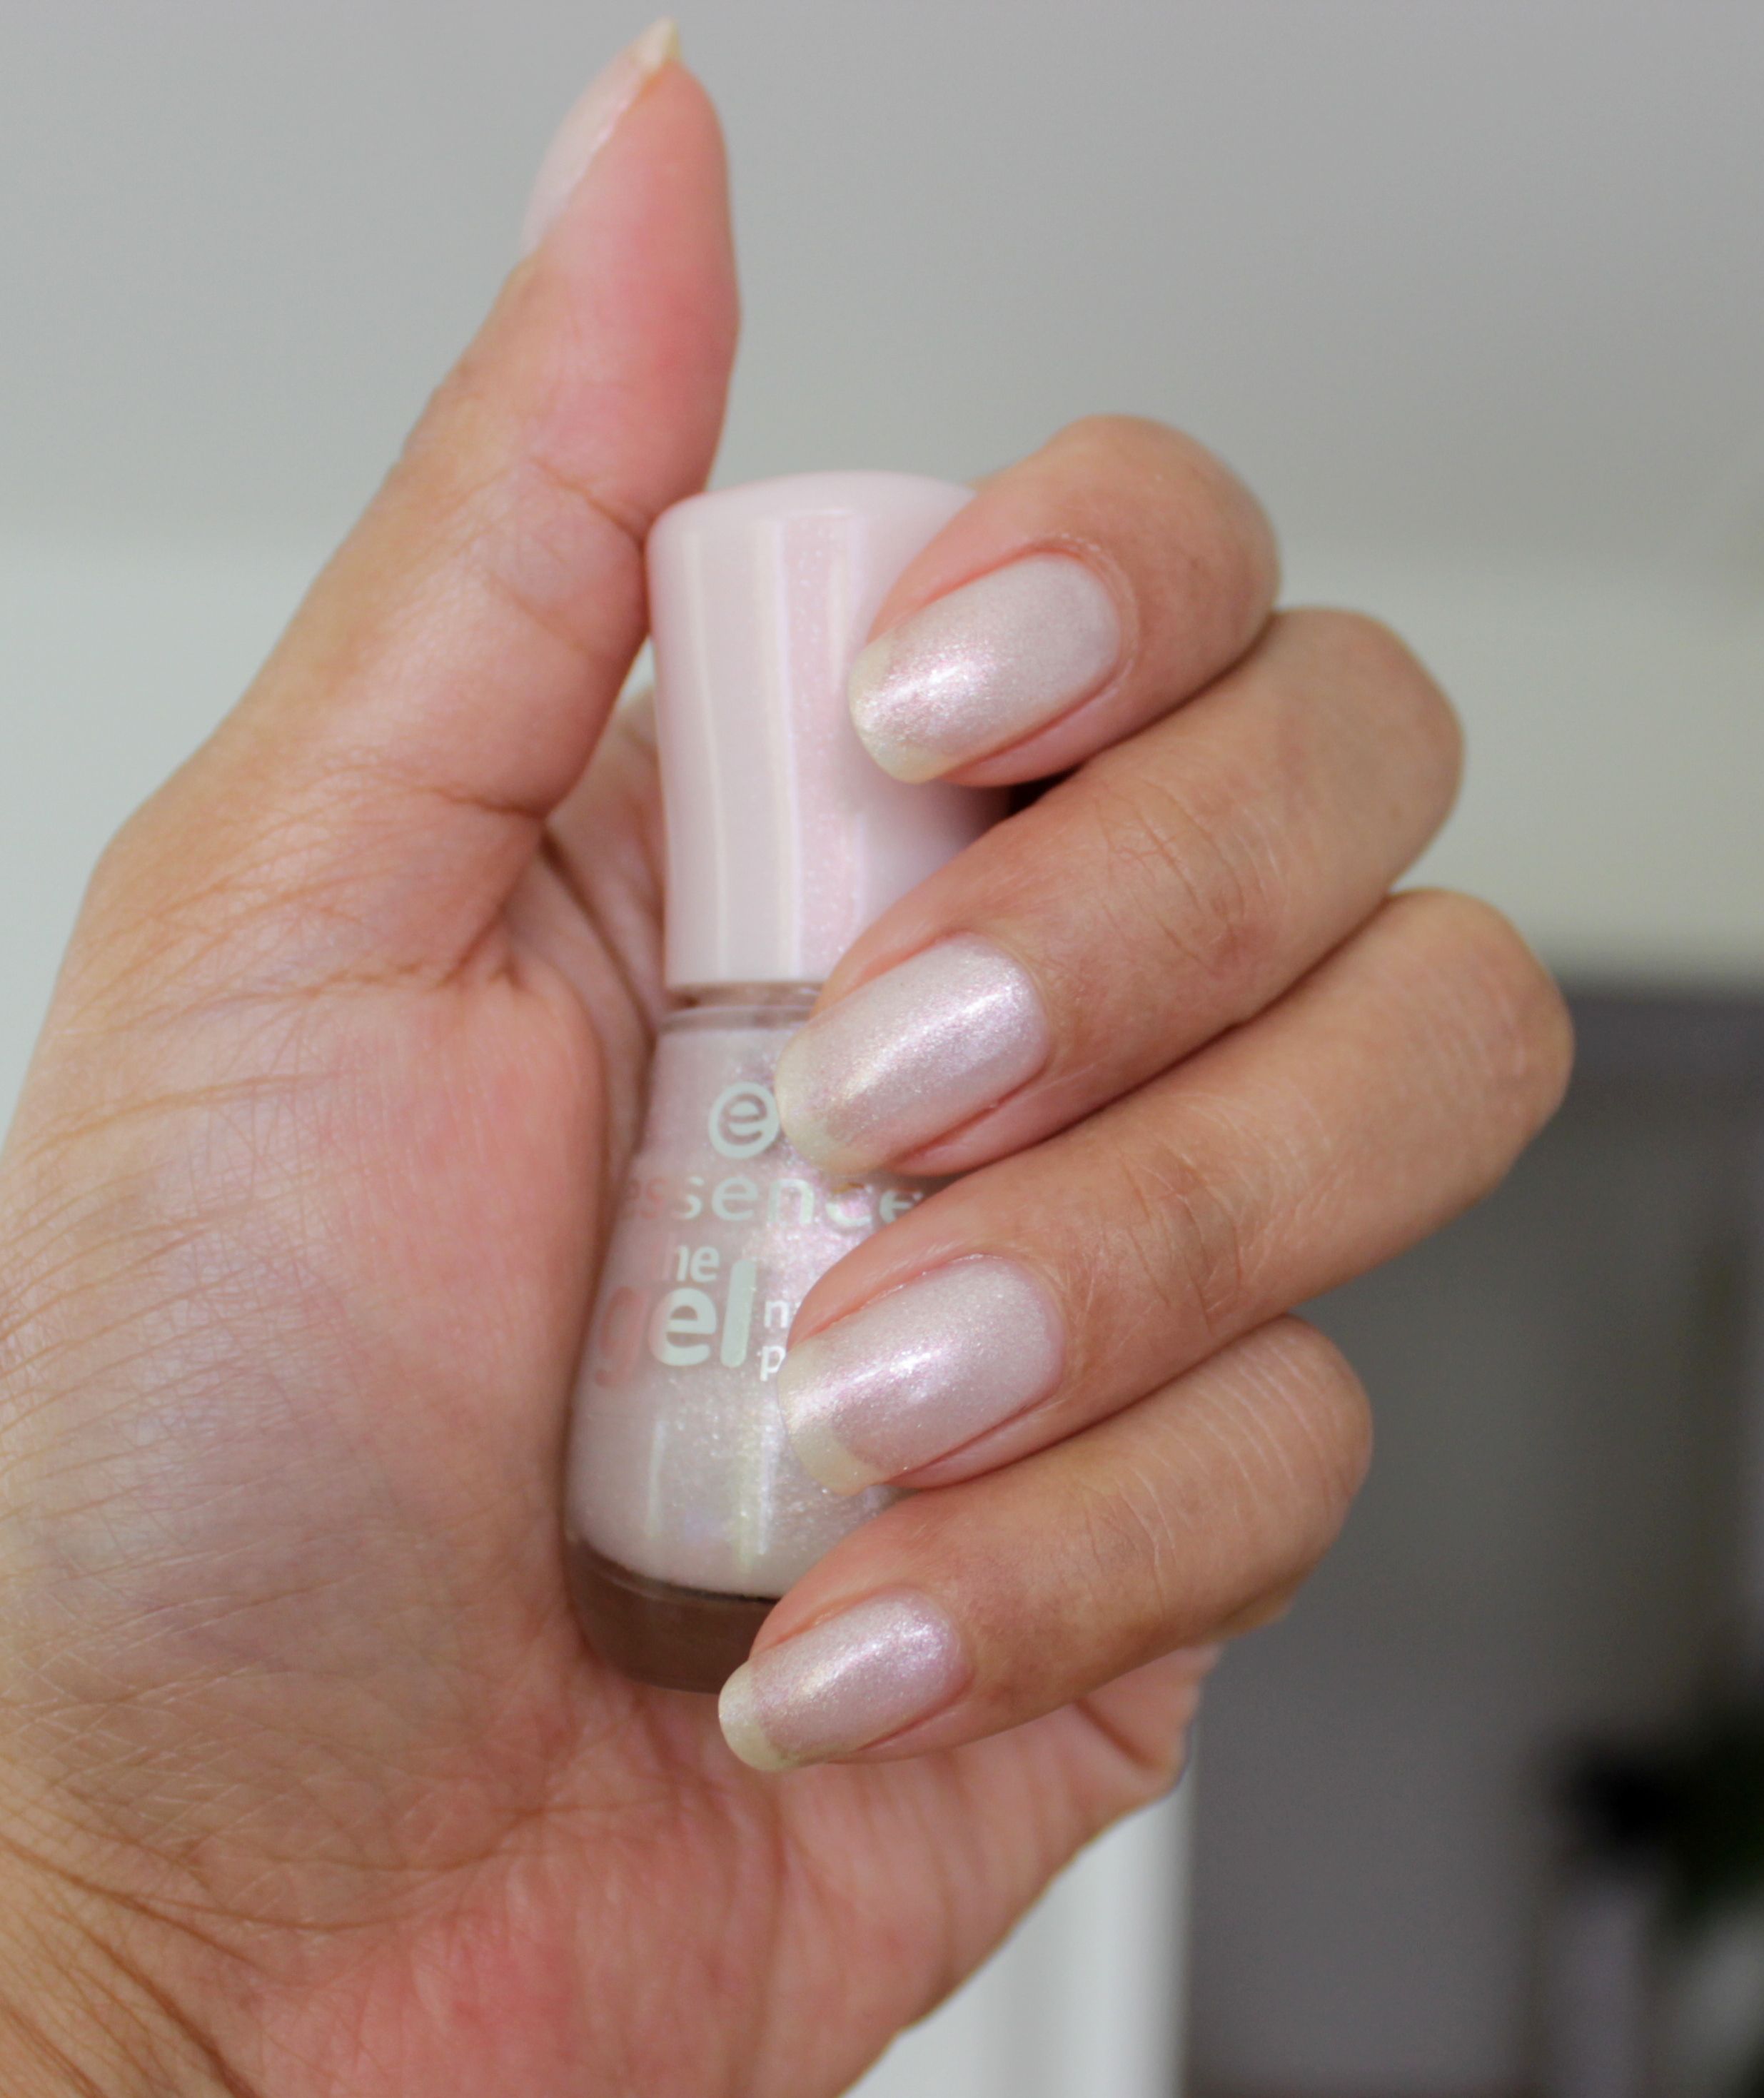 Essence The Gel Nails Review In 2020